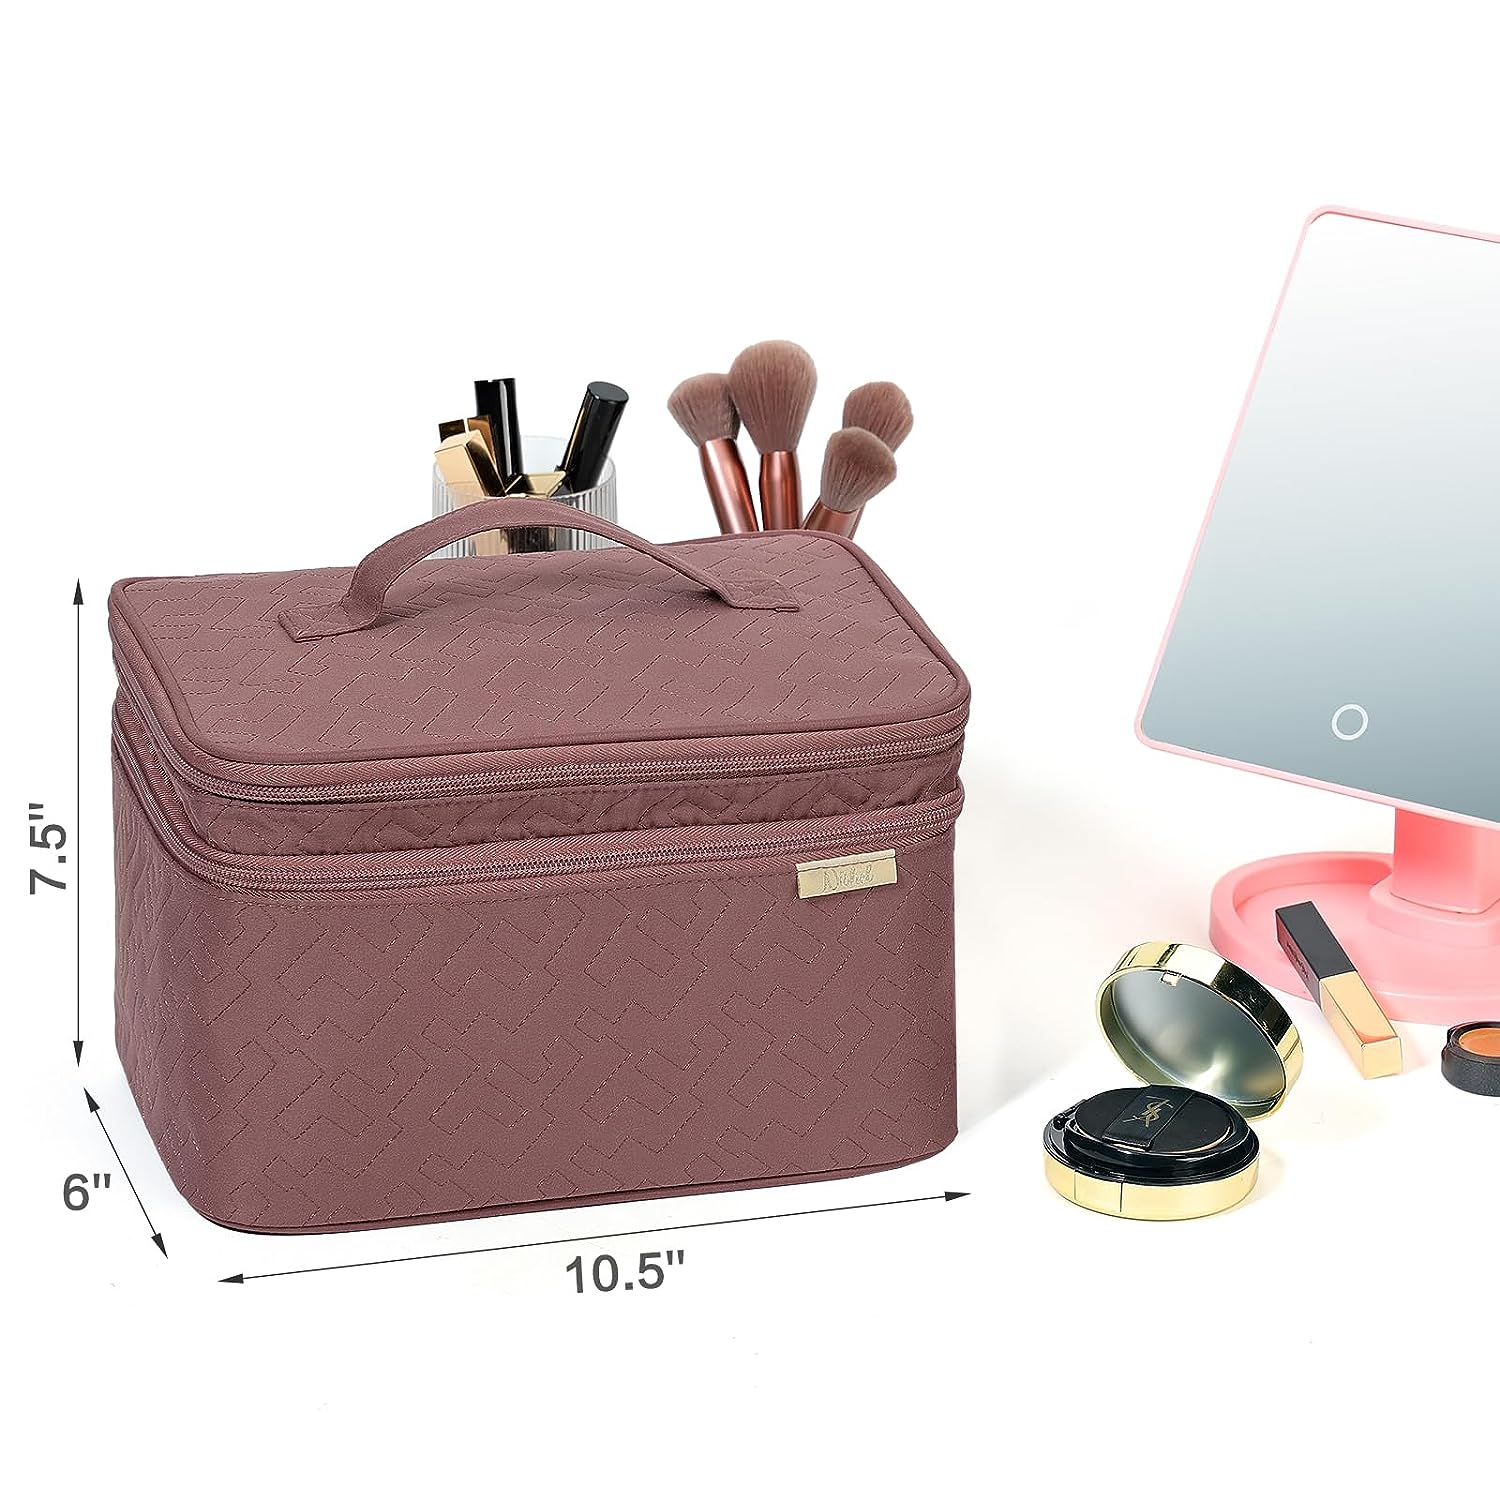 Blushbees® Double Layer Travel Makeup Bag - Rose-Wood Pink